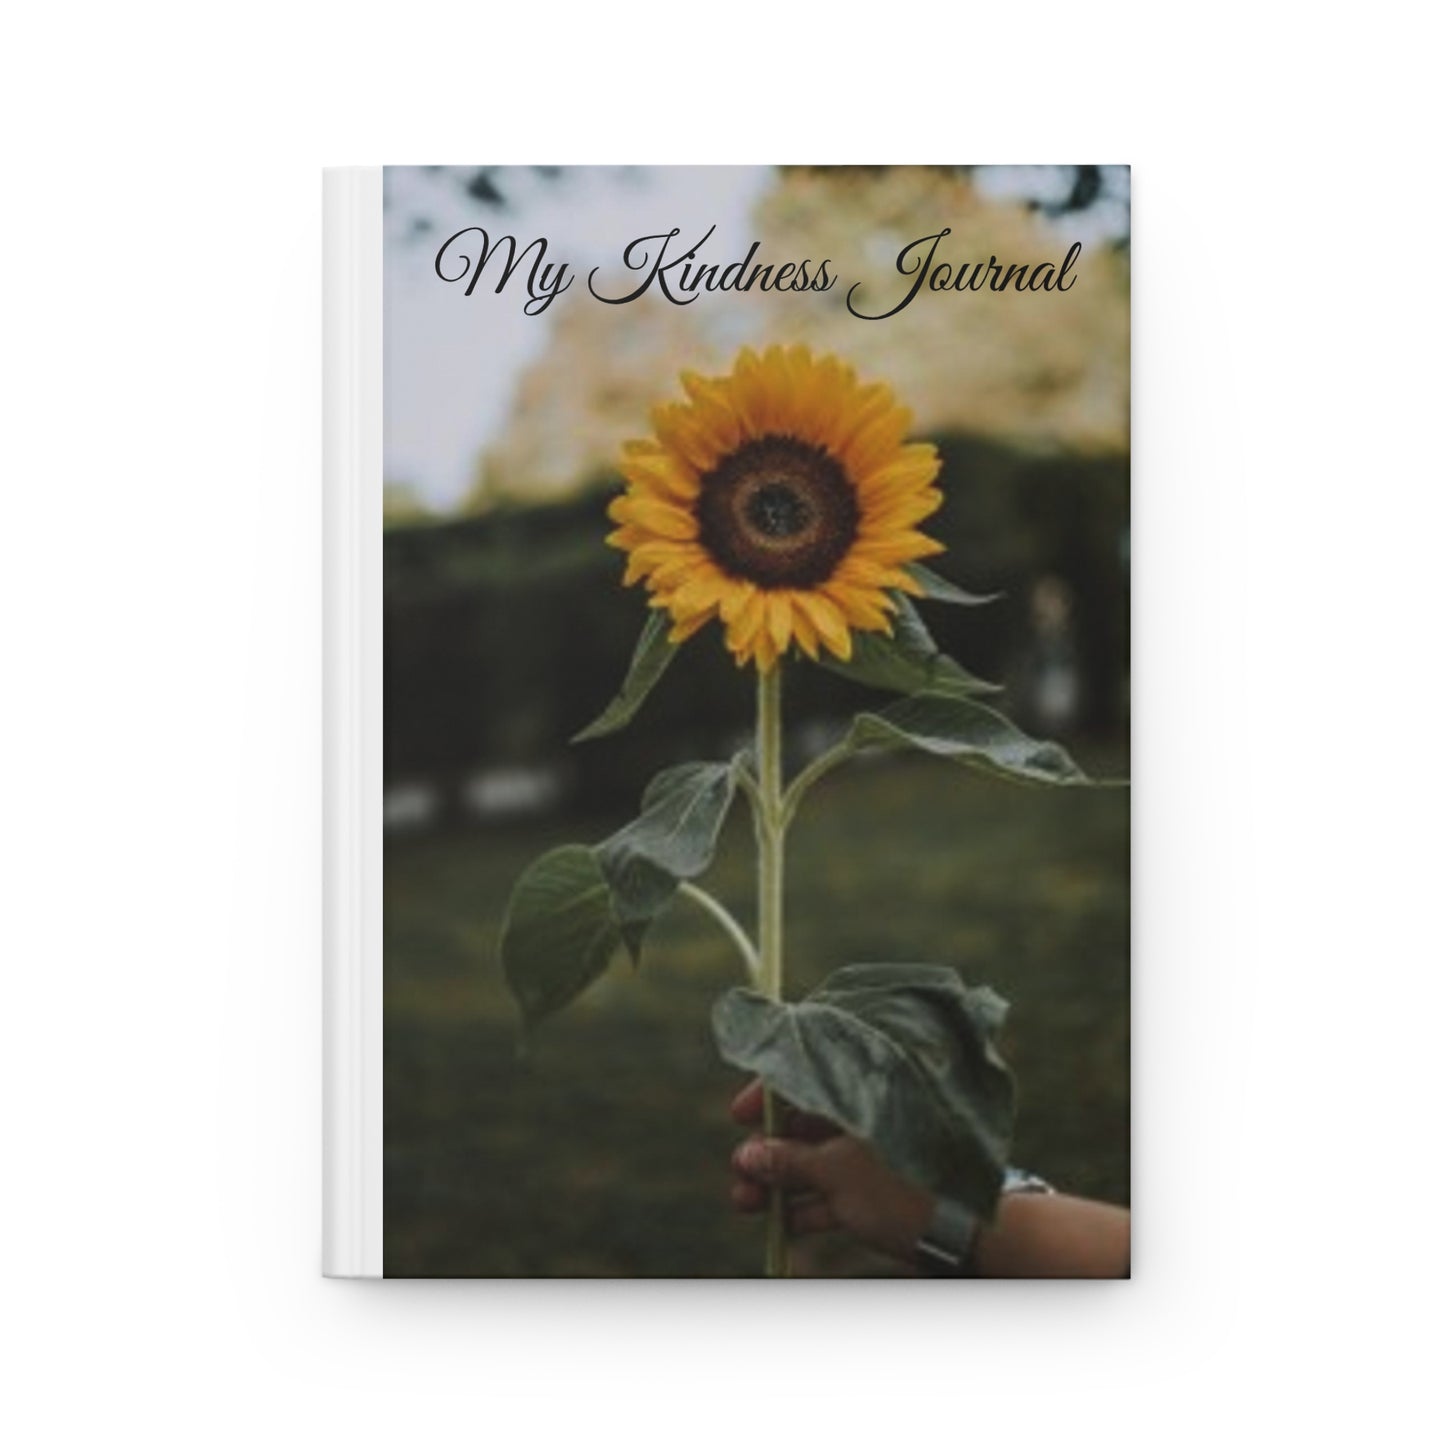 j2:My Kindness Journal Hardcover ***SHIPING INCLUDED***14.99***